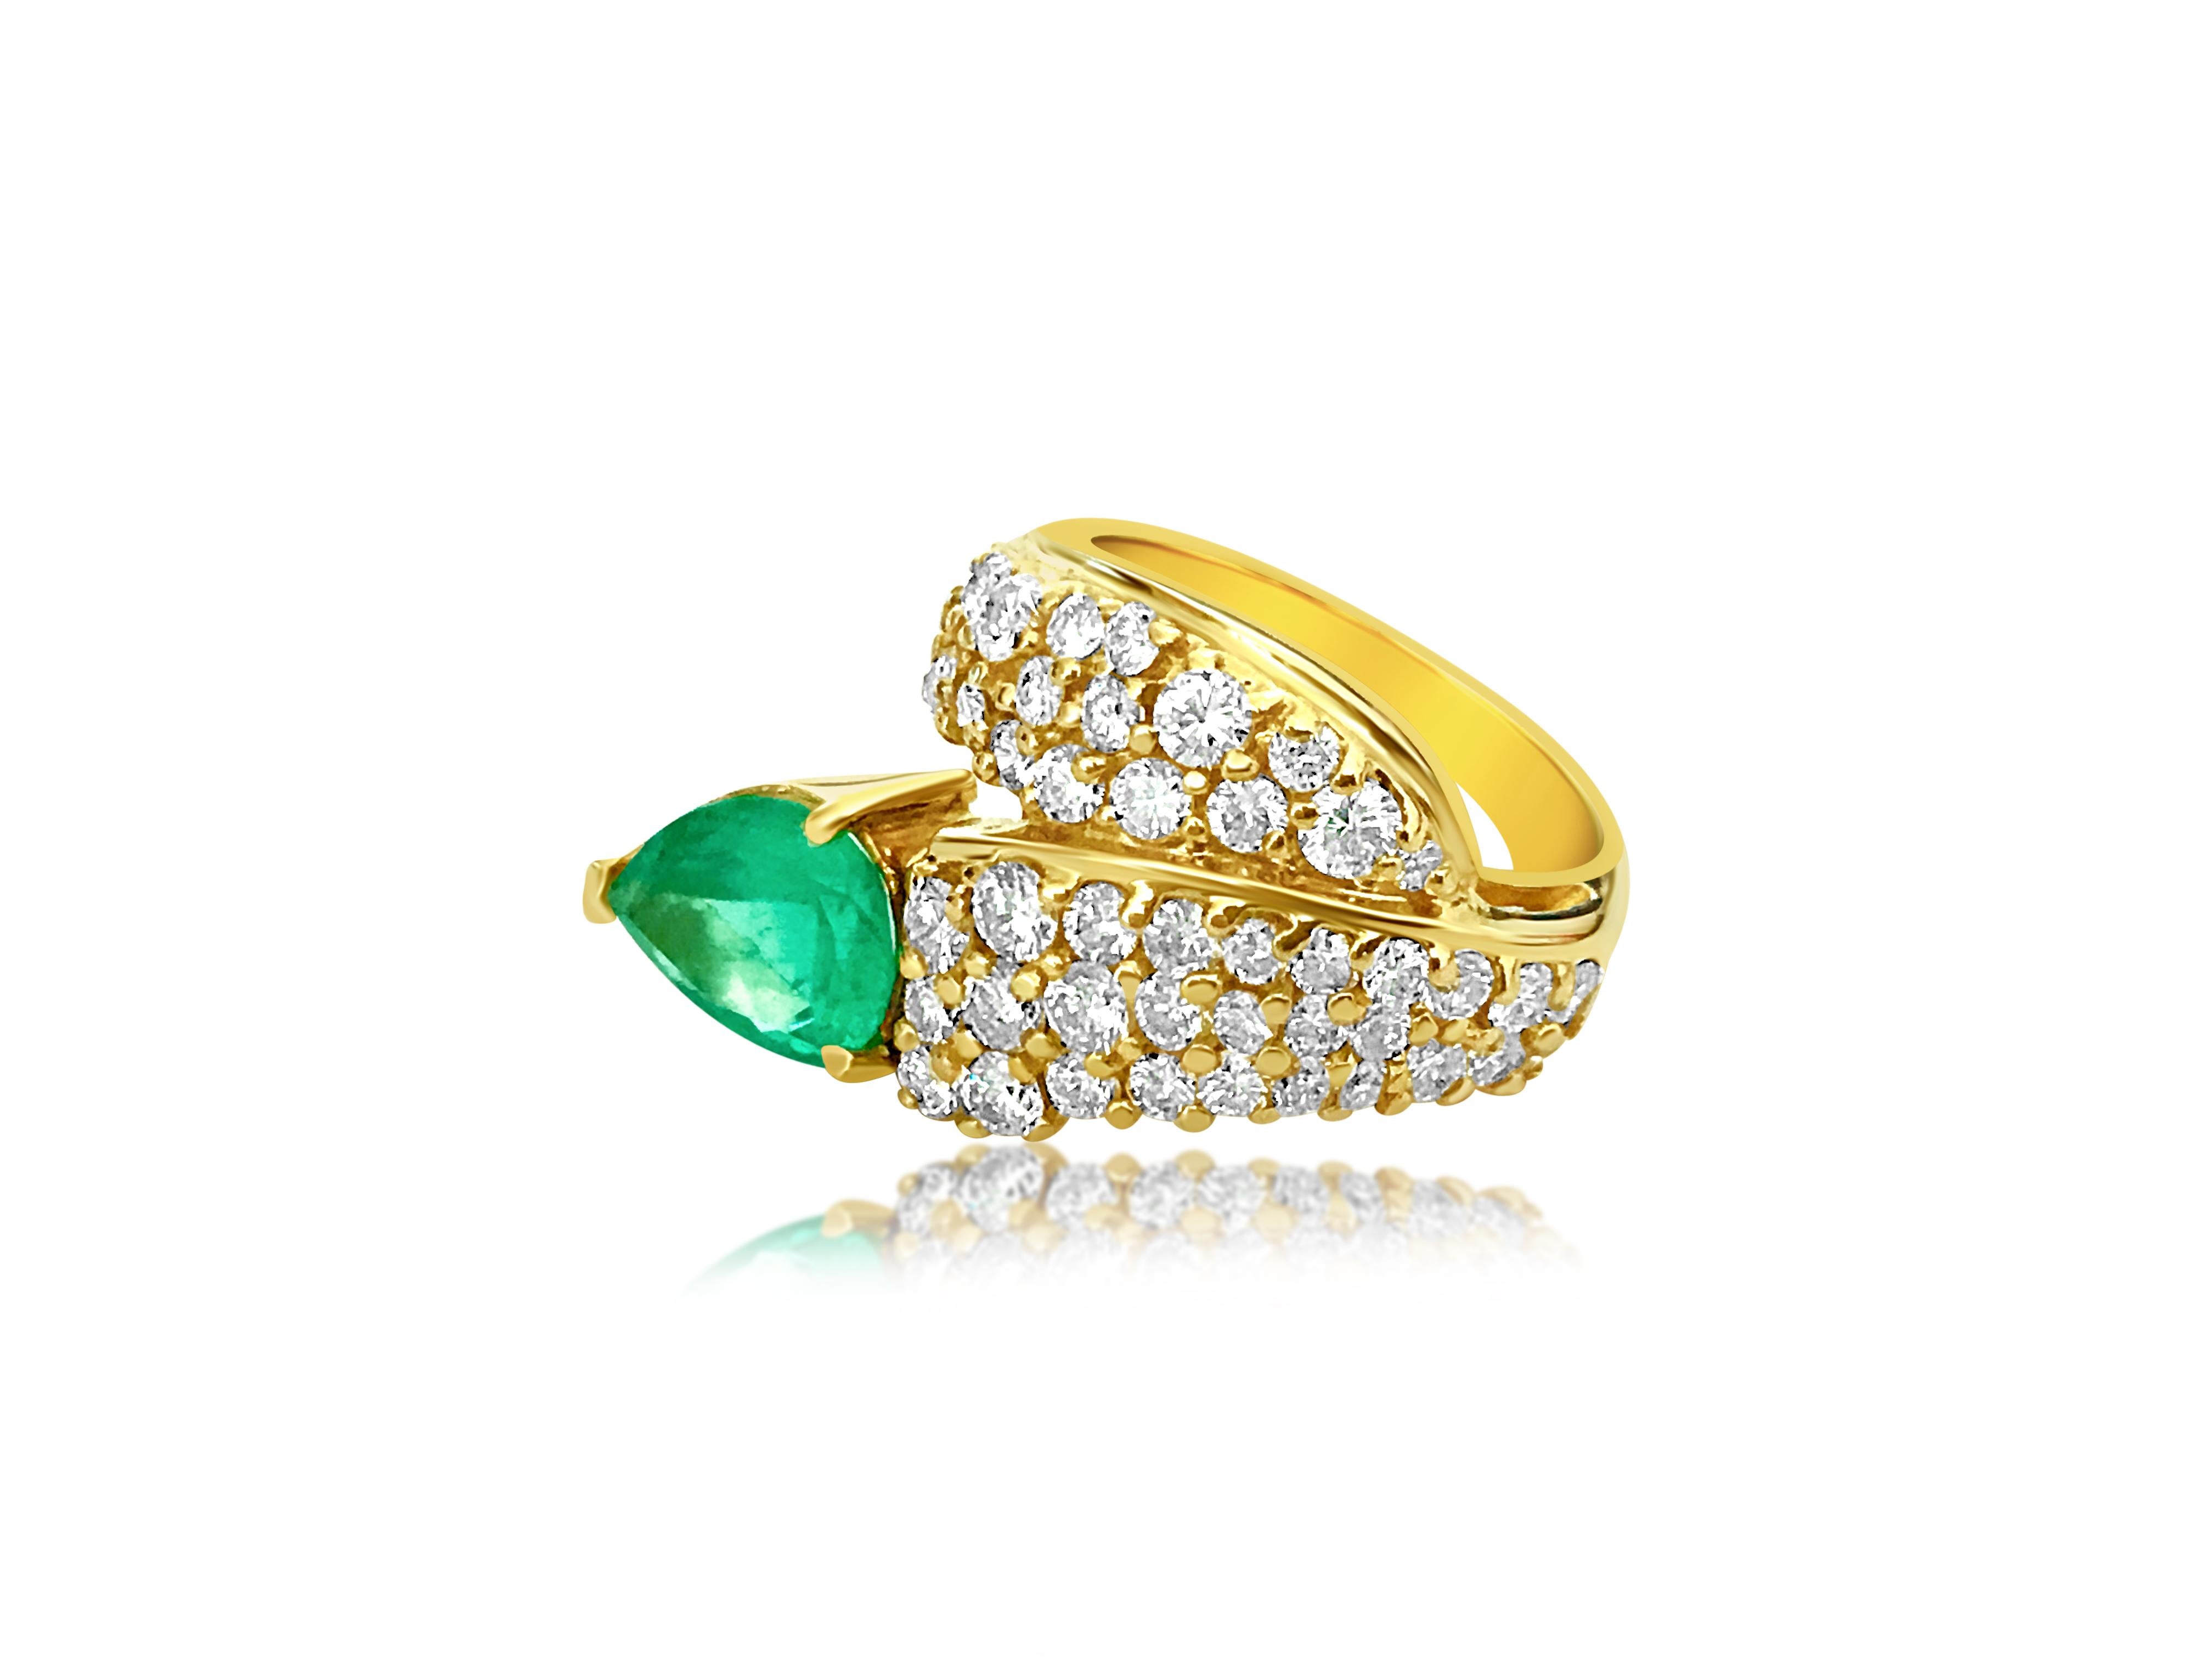 Metal: 14k yellow gold. 

Emerald: 3.00 carats. 100% natural earth mined Colombian emerald. Pear shape emerald set in prongs. Strong color and saturation in the emerald. 

Diamonds: 100% natural earth mined and genuine. 
1.25 carat diamonds total.